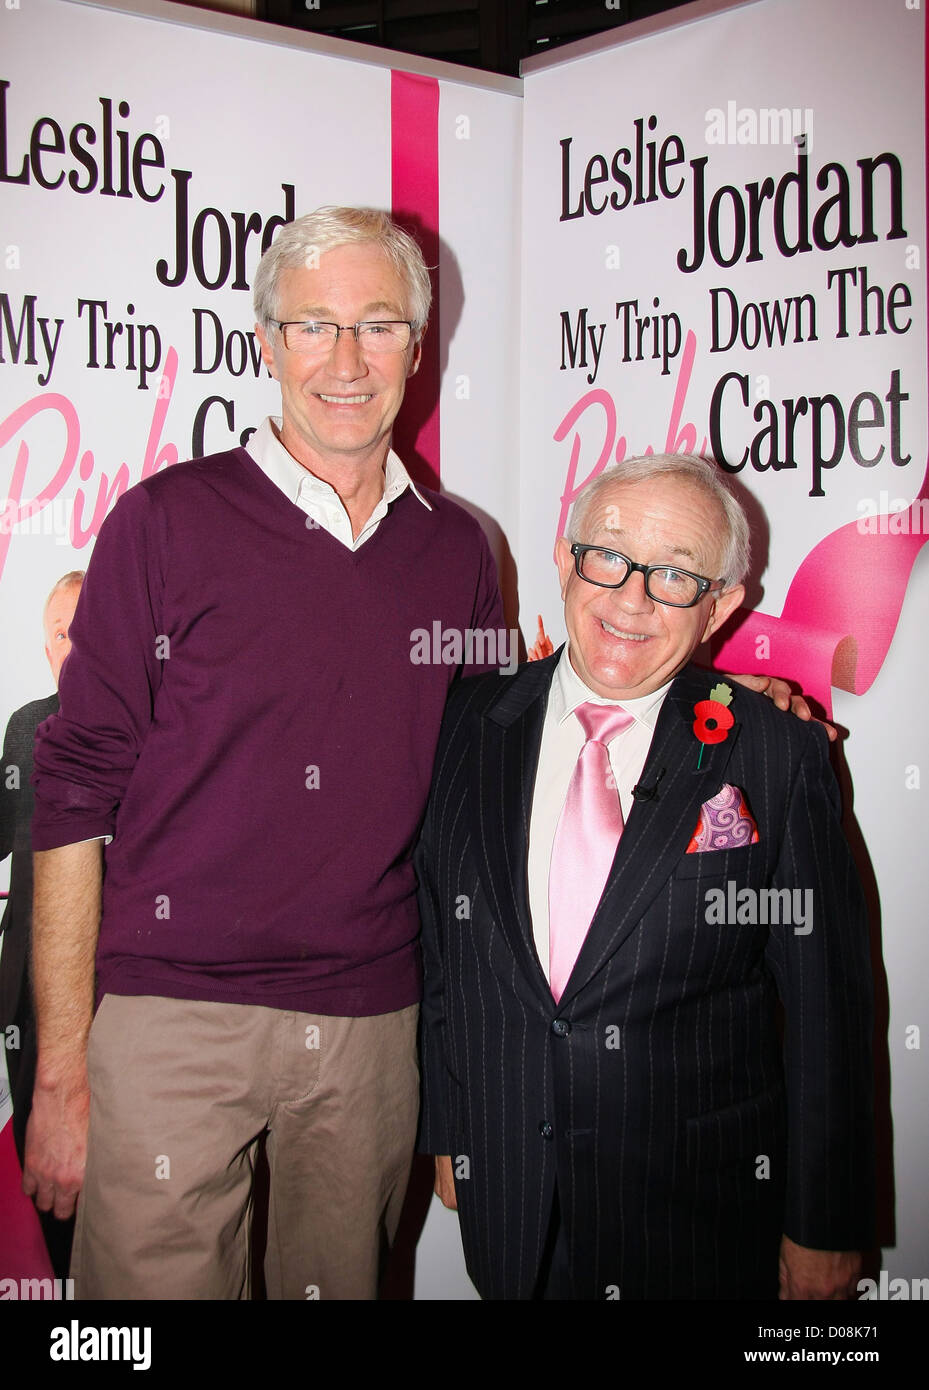 Paul O'Grady and Leslie Jordan attend a press launch for Leslie Jordan's  new book 'My Trip Down The Pink Carpet'held at The Stock Photo - Alamy